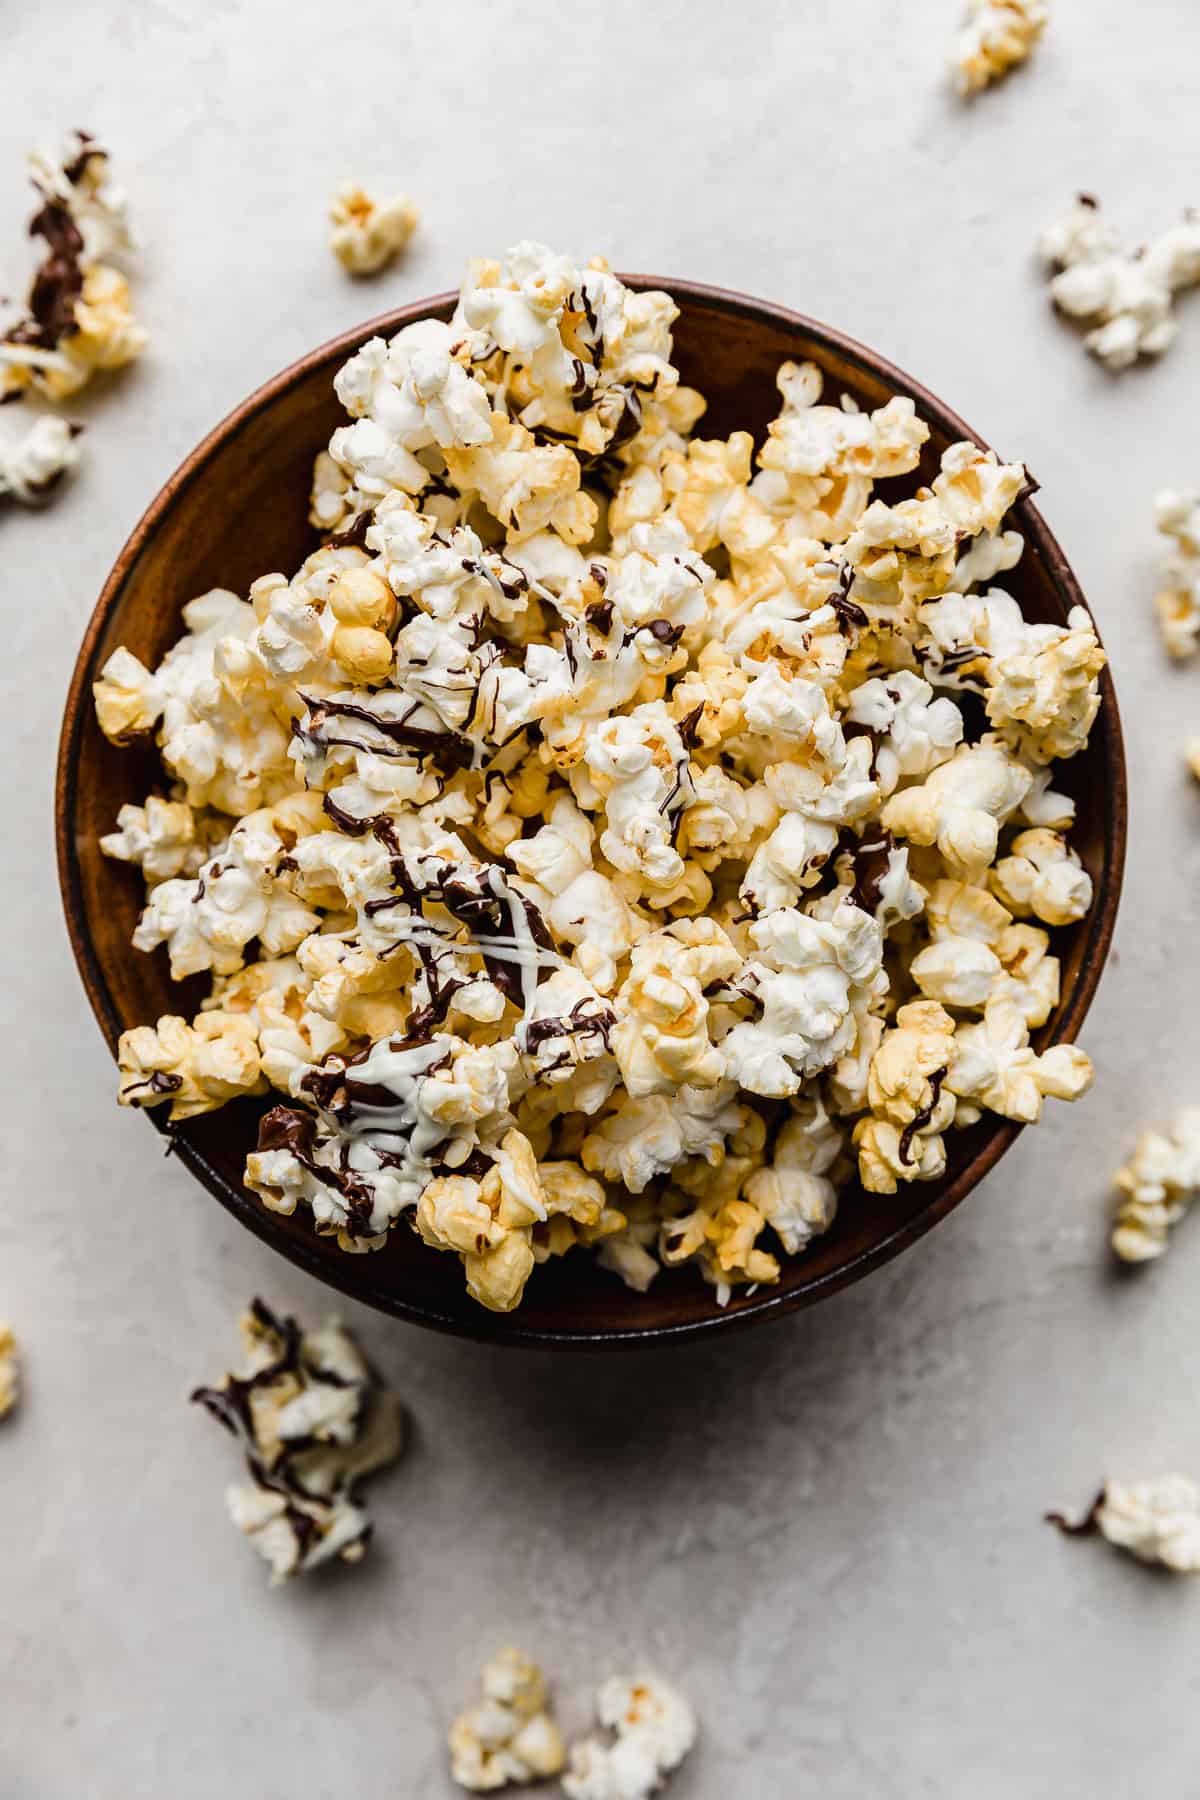 A bowl full of Chocolate Drizzled Popcorn on a gray background.